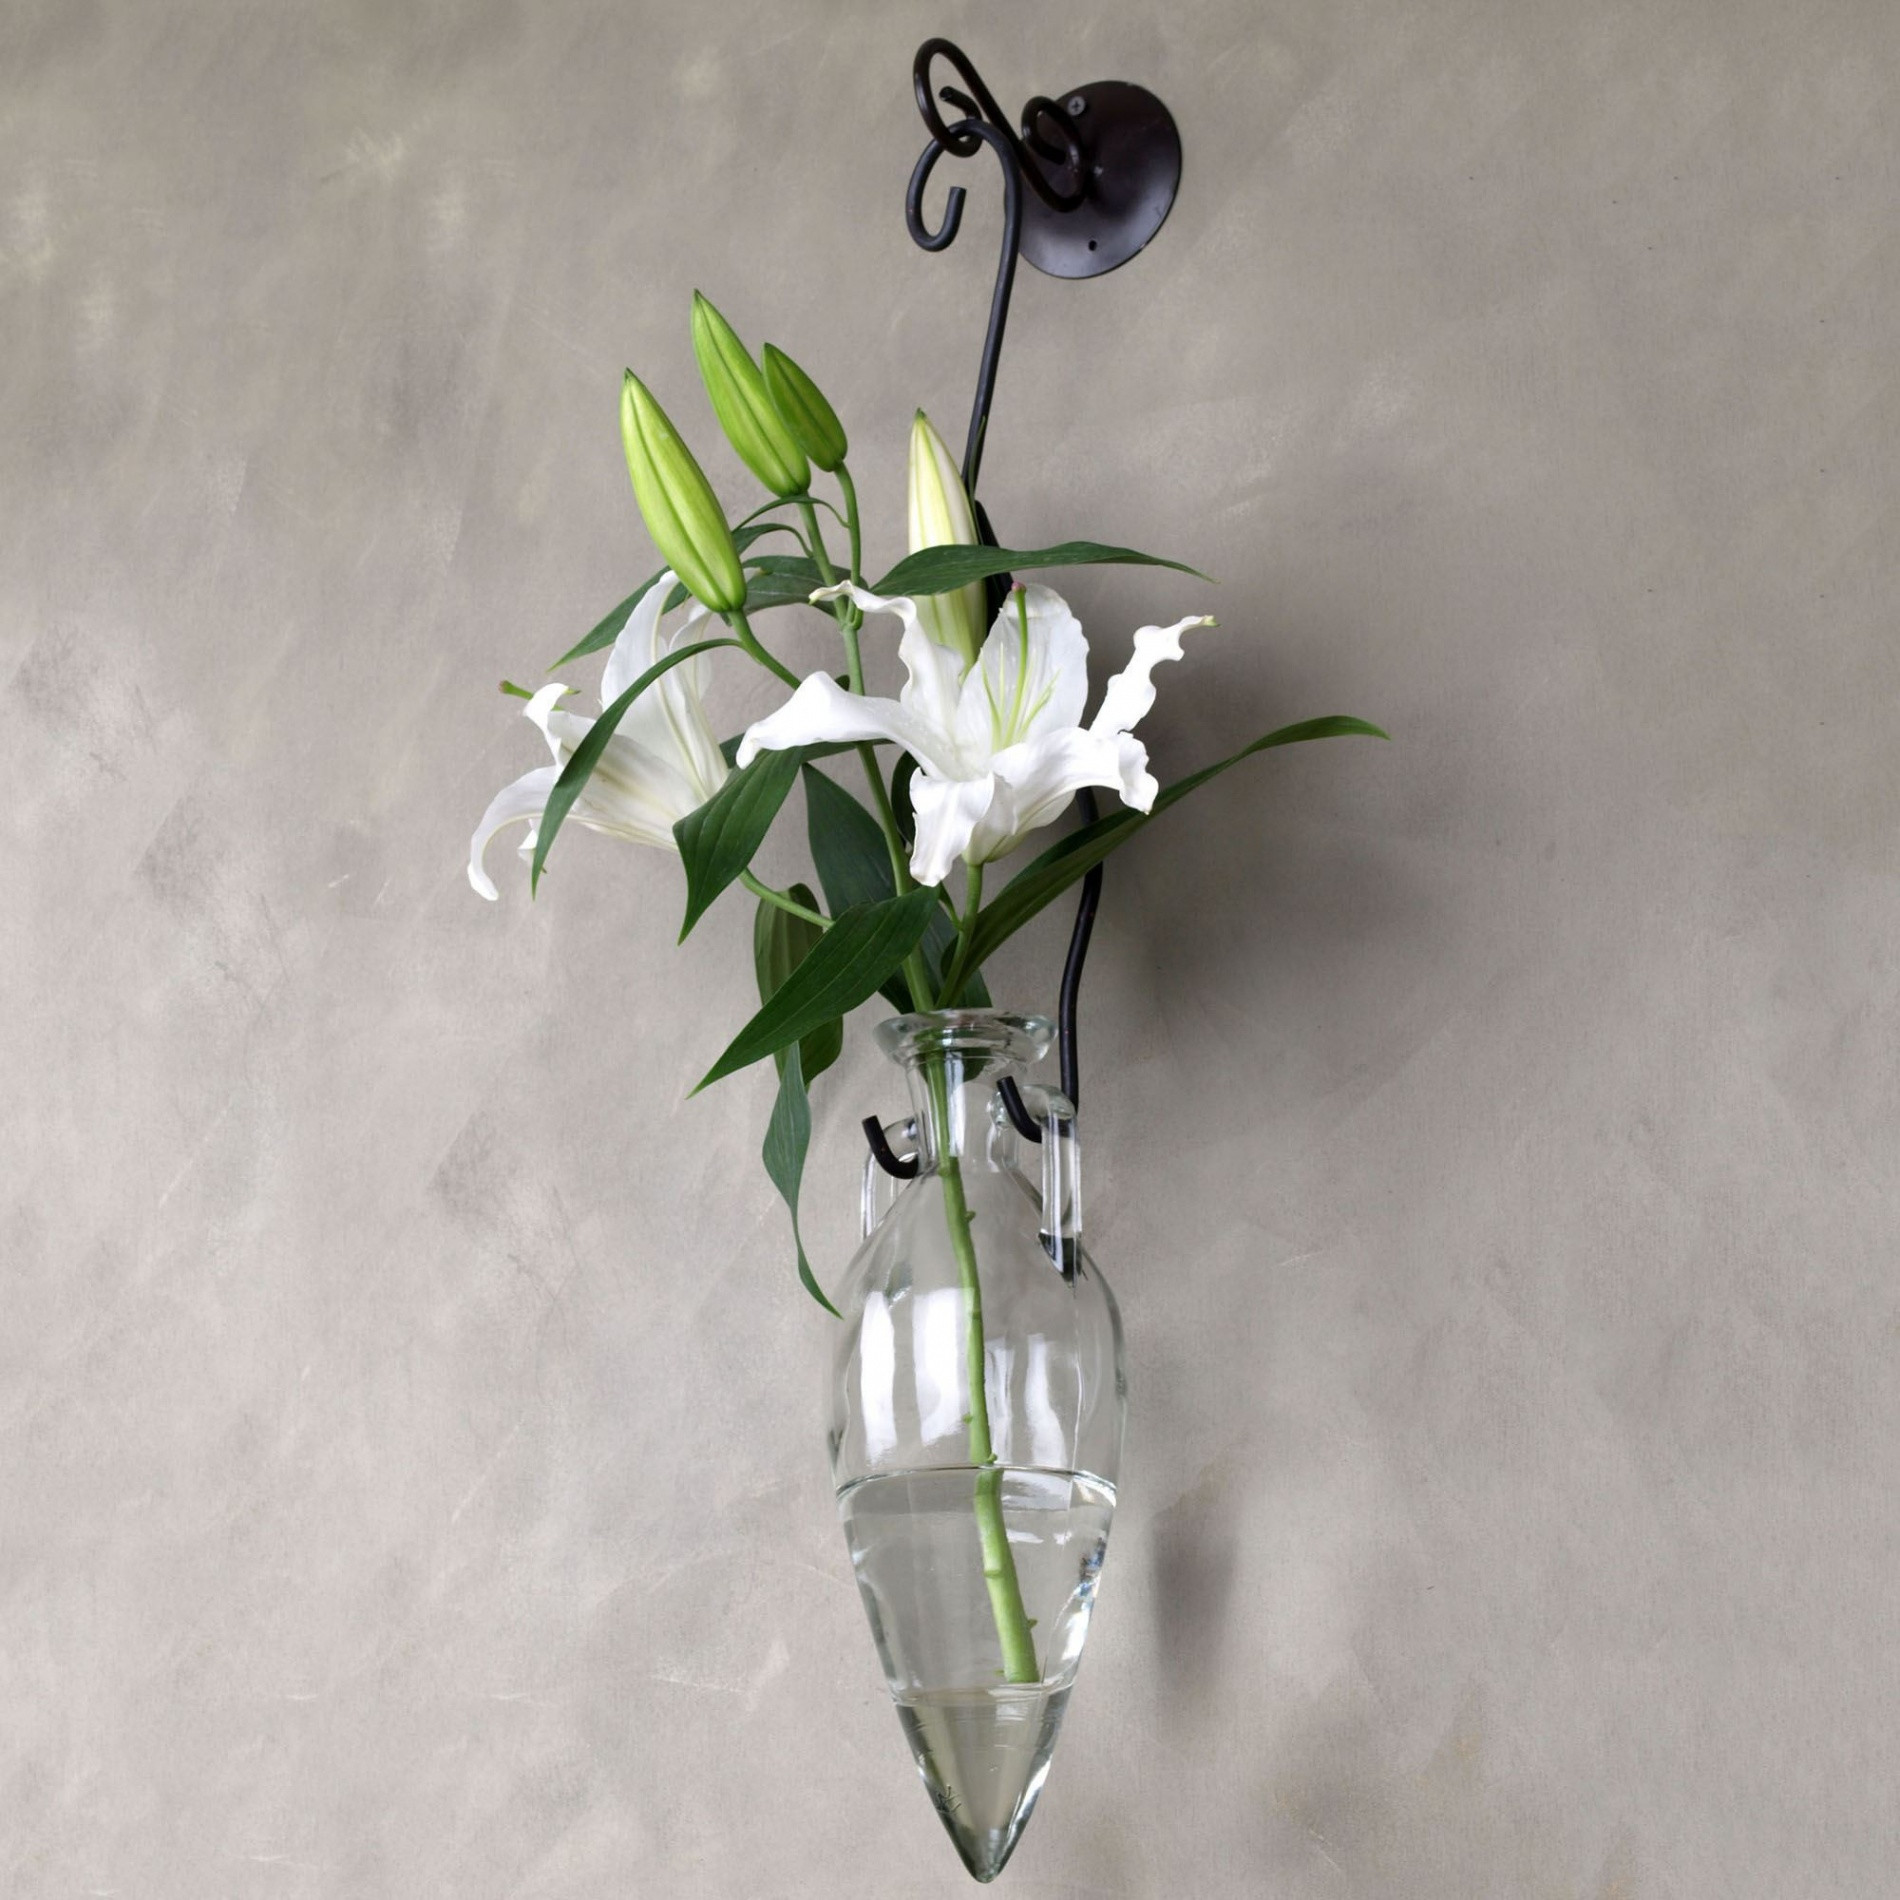 25 Awesome Tall Metal Vases 2024 free download tall metal vases of h vases wall hanging flower vase newspaper i 0d scheme wall scheme with regard to h vases wall hanging flower vase newspaper i 0d scheme wall scheme vase blanc deco